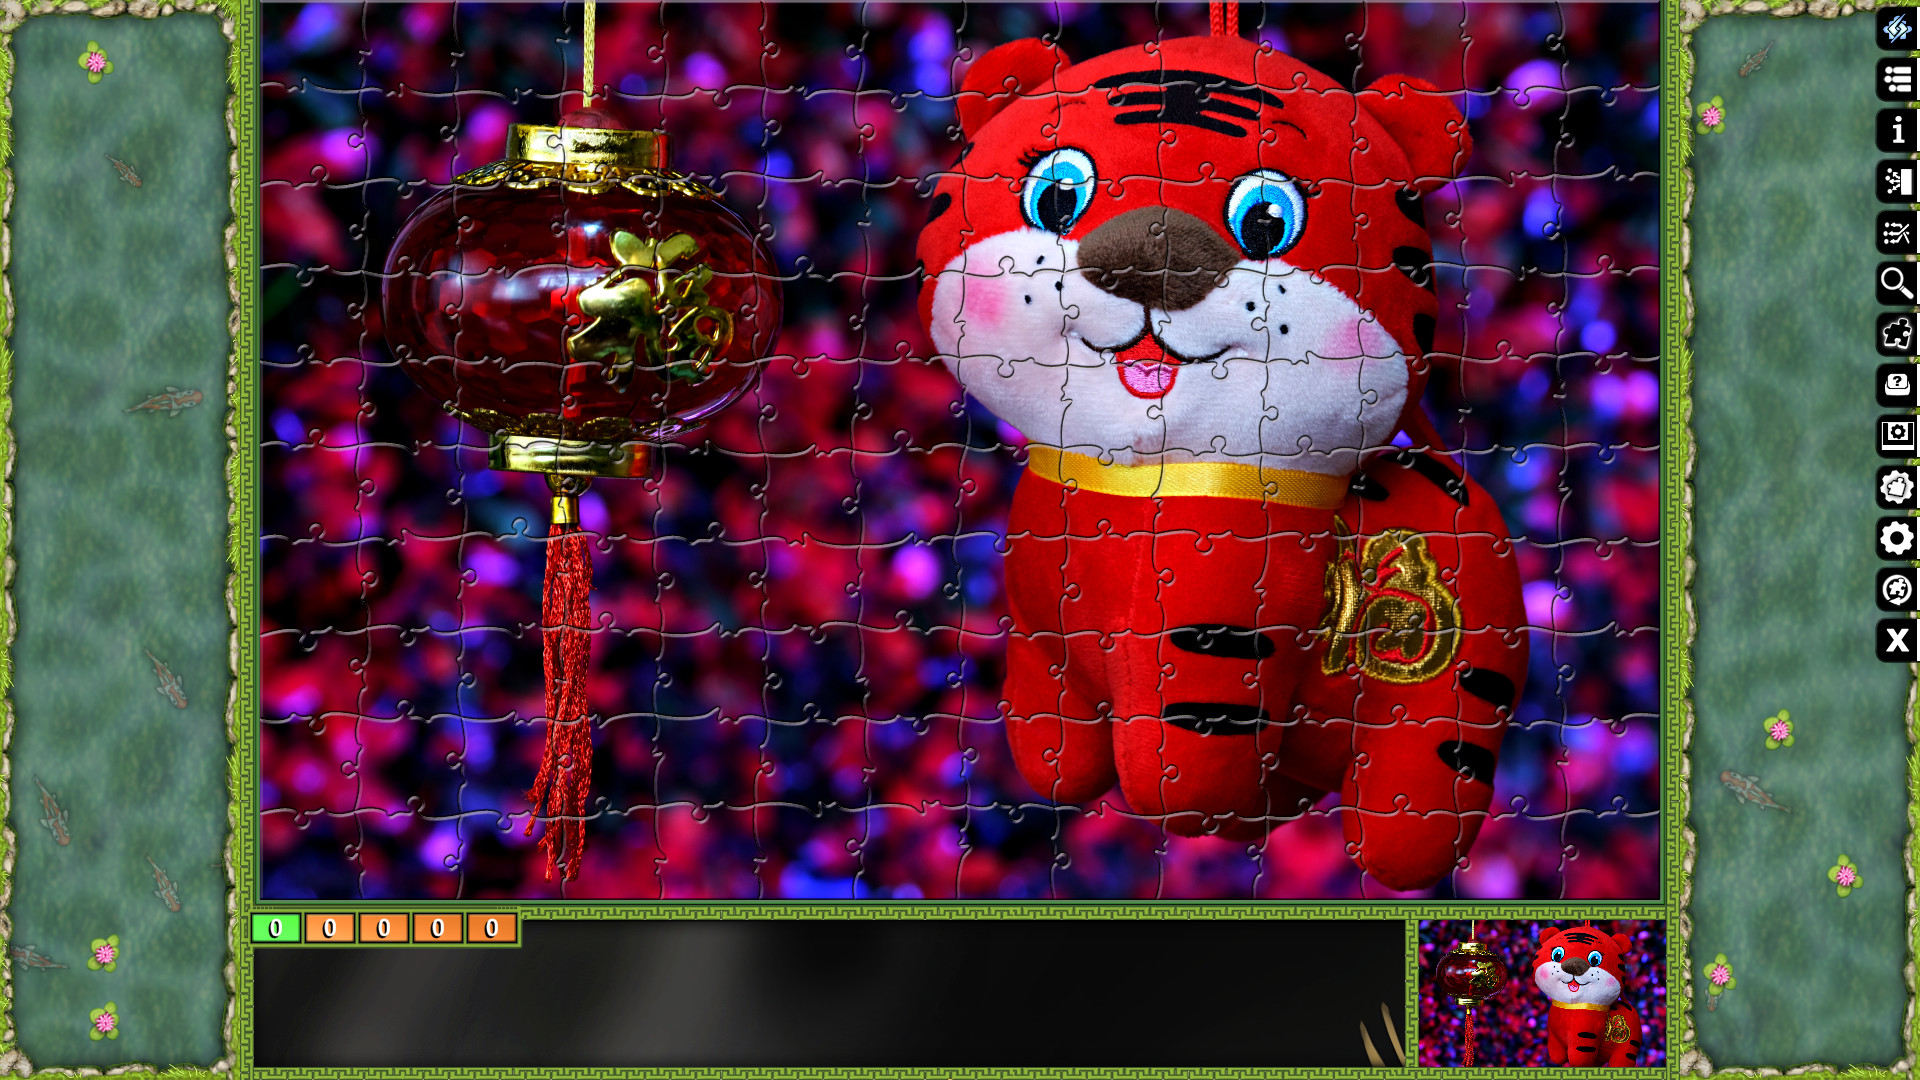 Jigsaw Puzzle Pack - Pixel Puzzles Ultimate: Lunar New Year Featured Screenshot #1